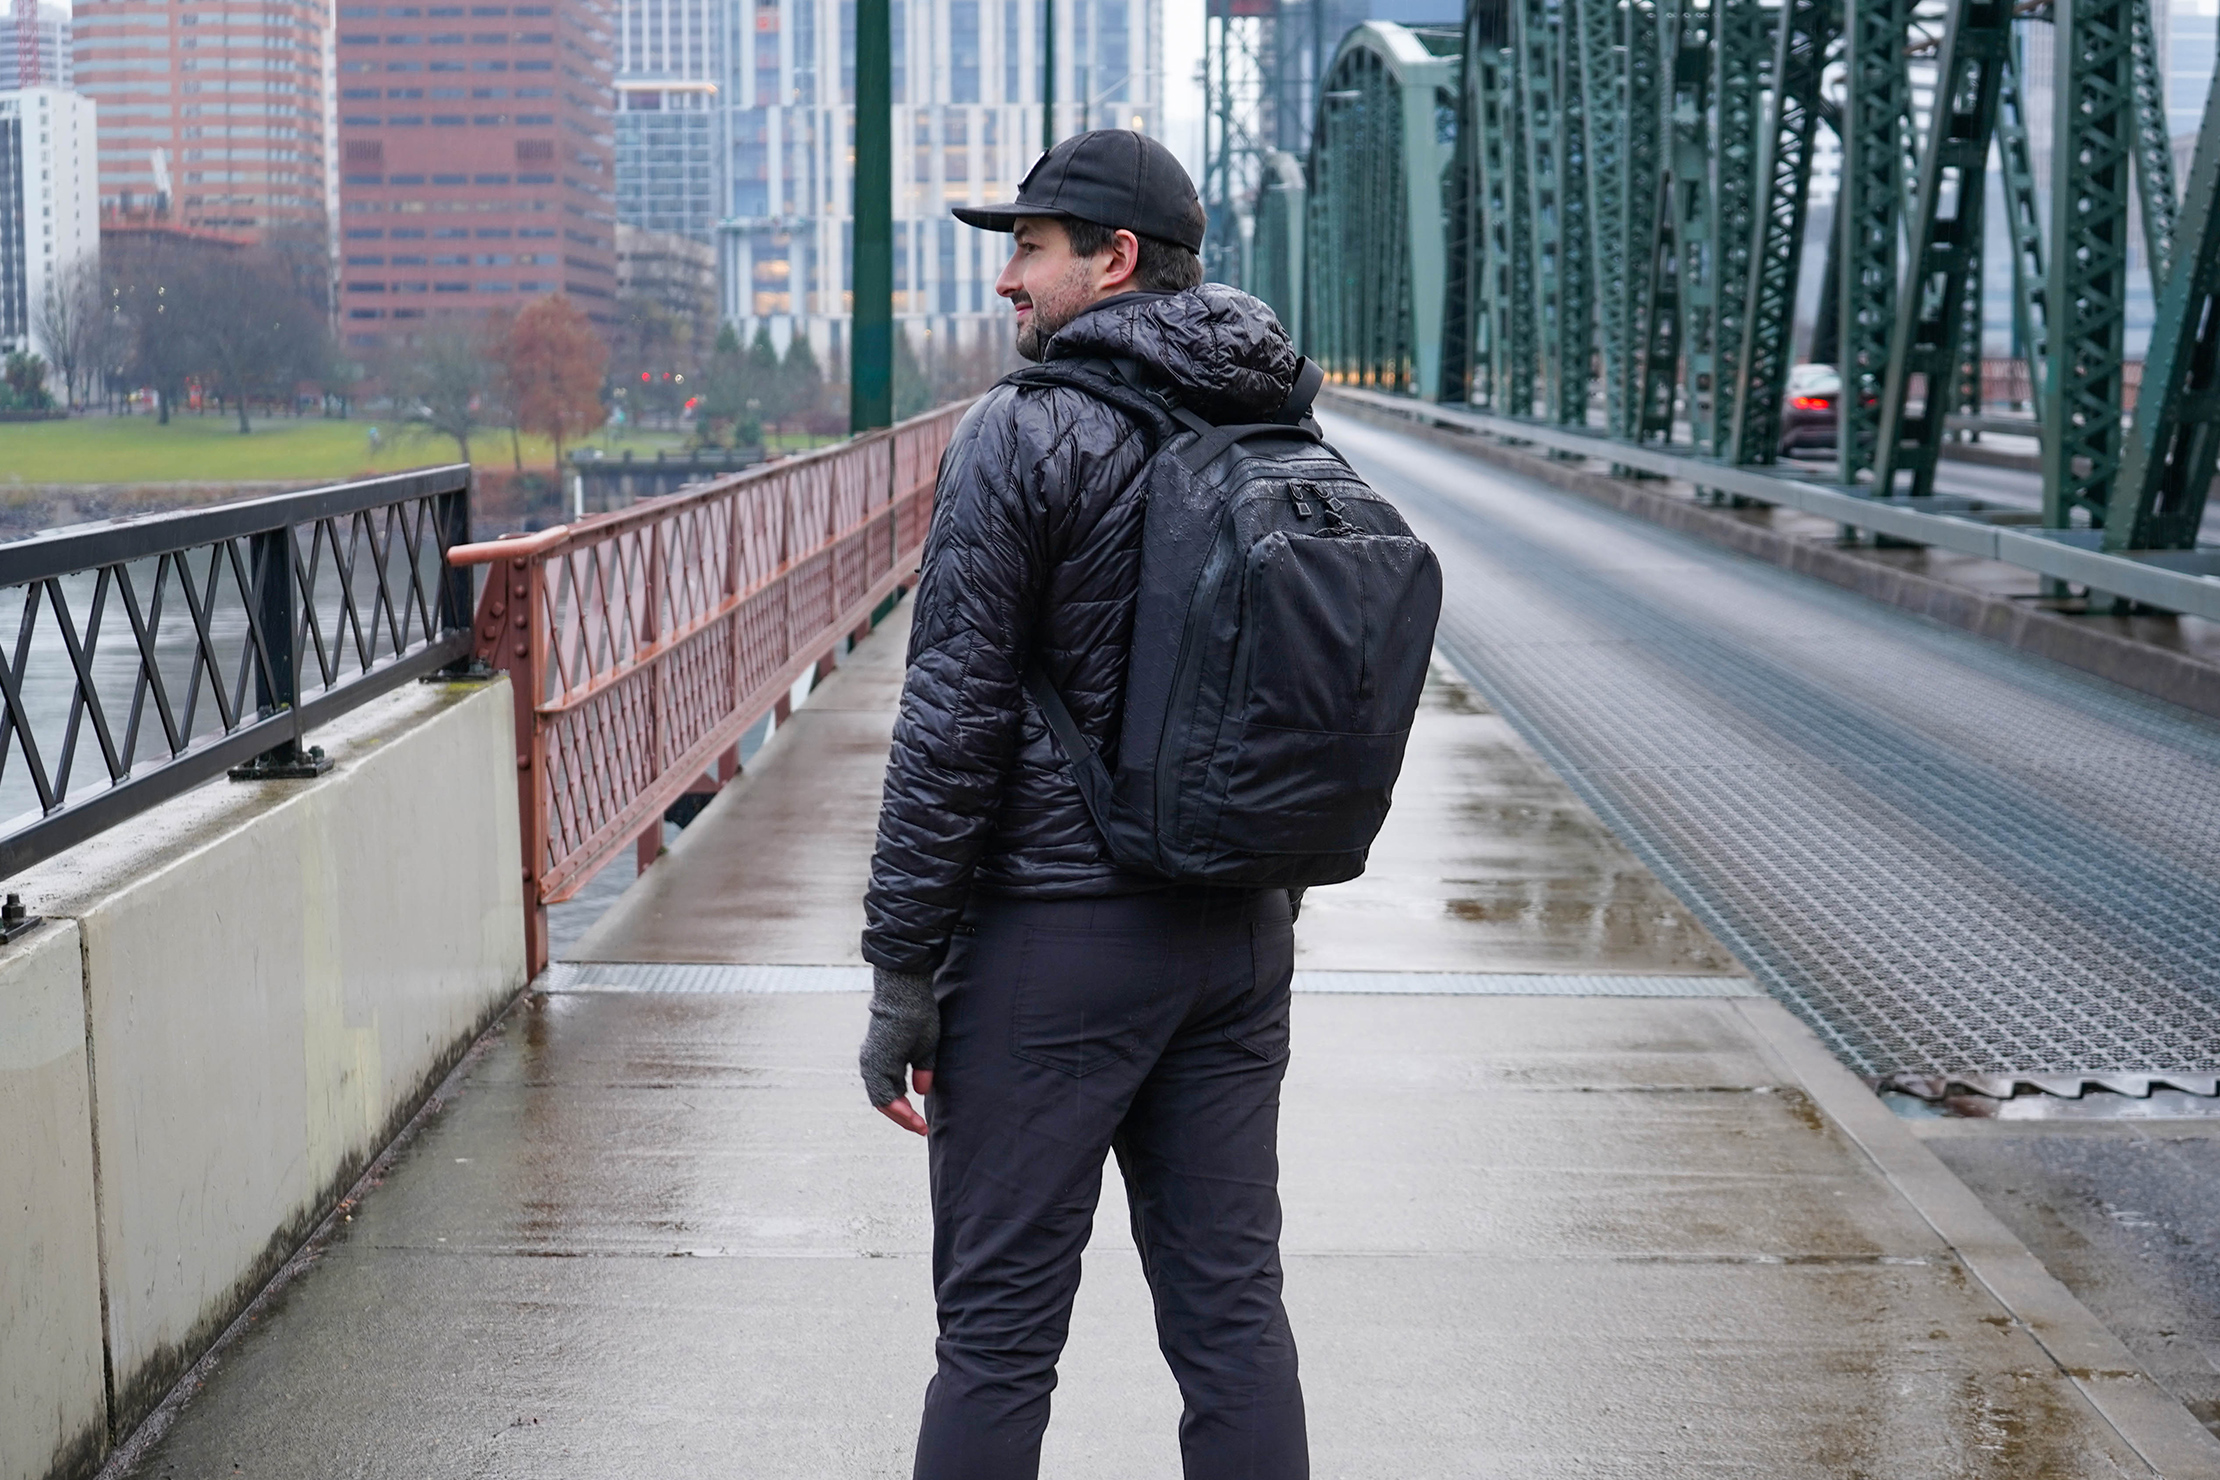 Triple Aught Design Axiom 24 Pack In Portland